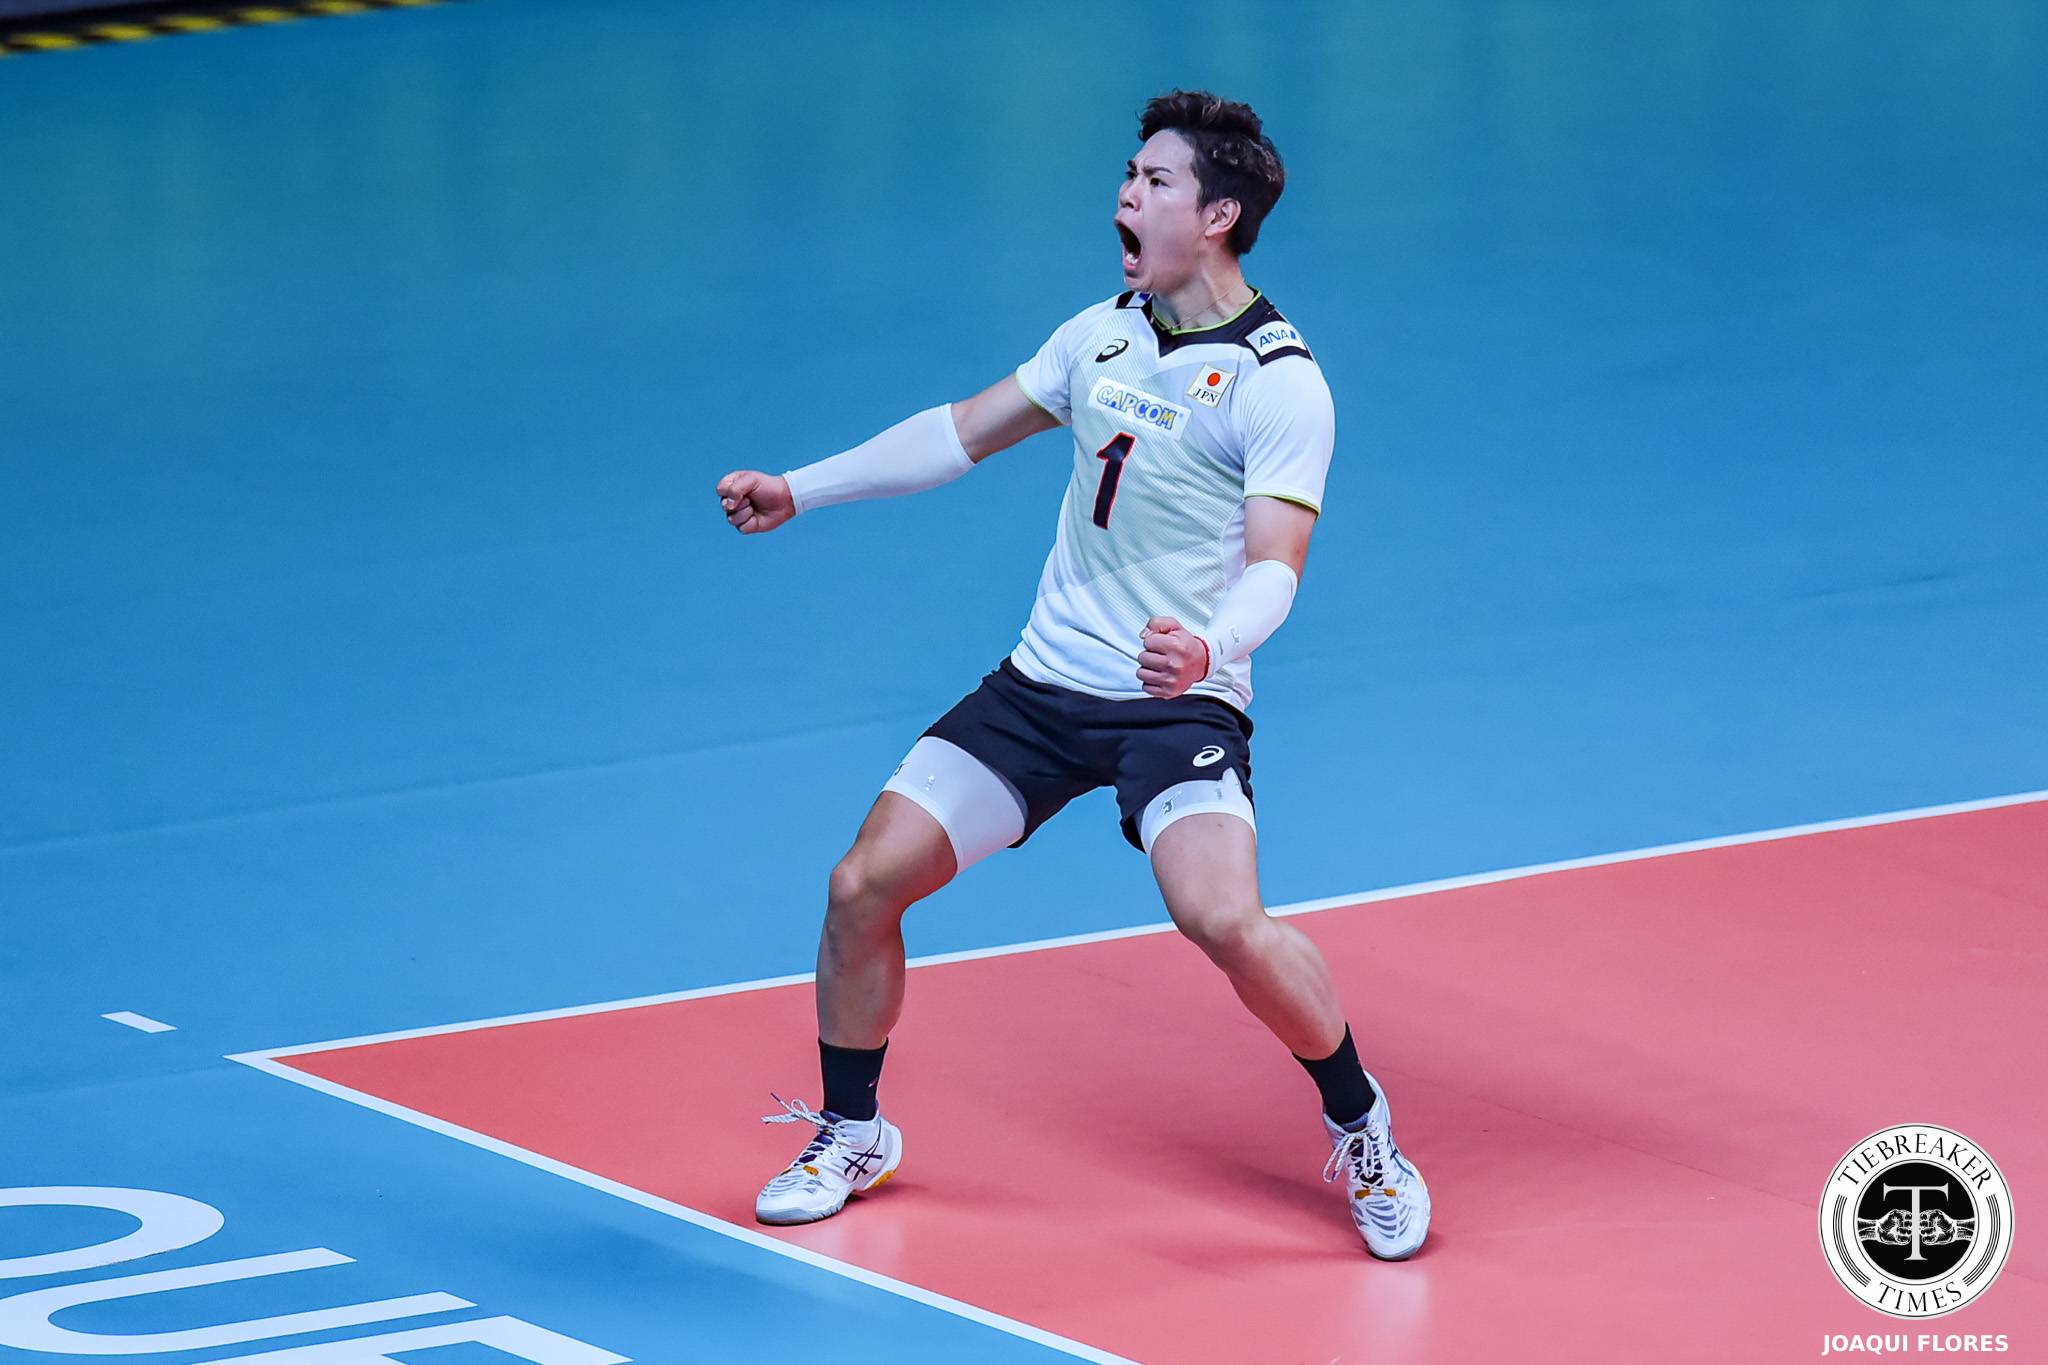 VNL Nishida puts on a show, powers Japan to thrilling 5-set win over Italy